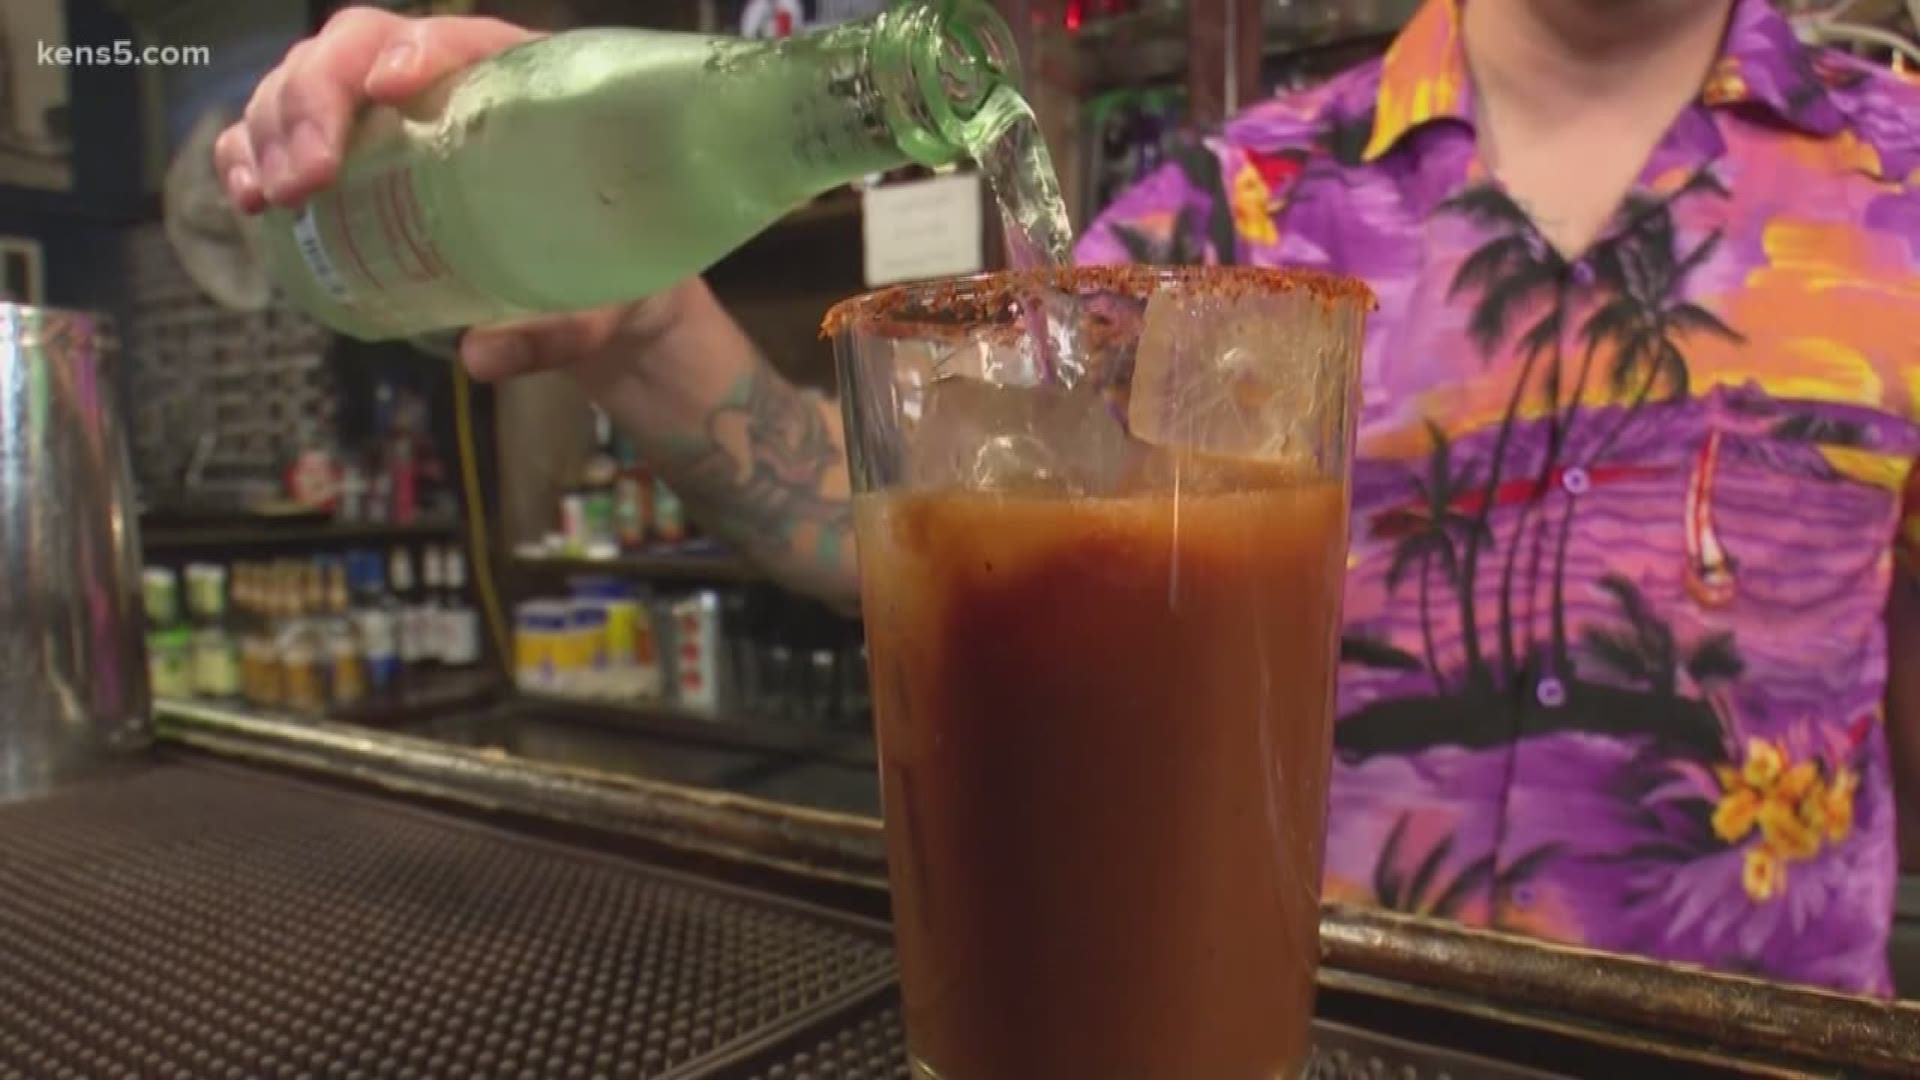 Health-conscious millennials and more openness about sobriety are creating a market for “zero-proof” drinks.